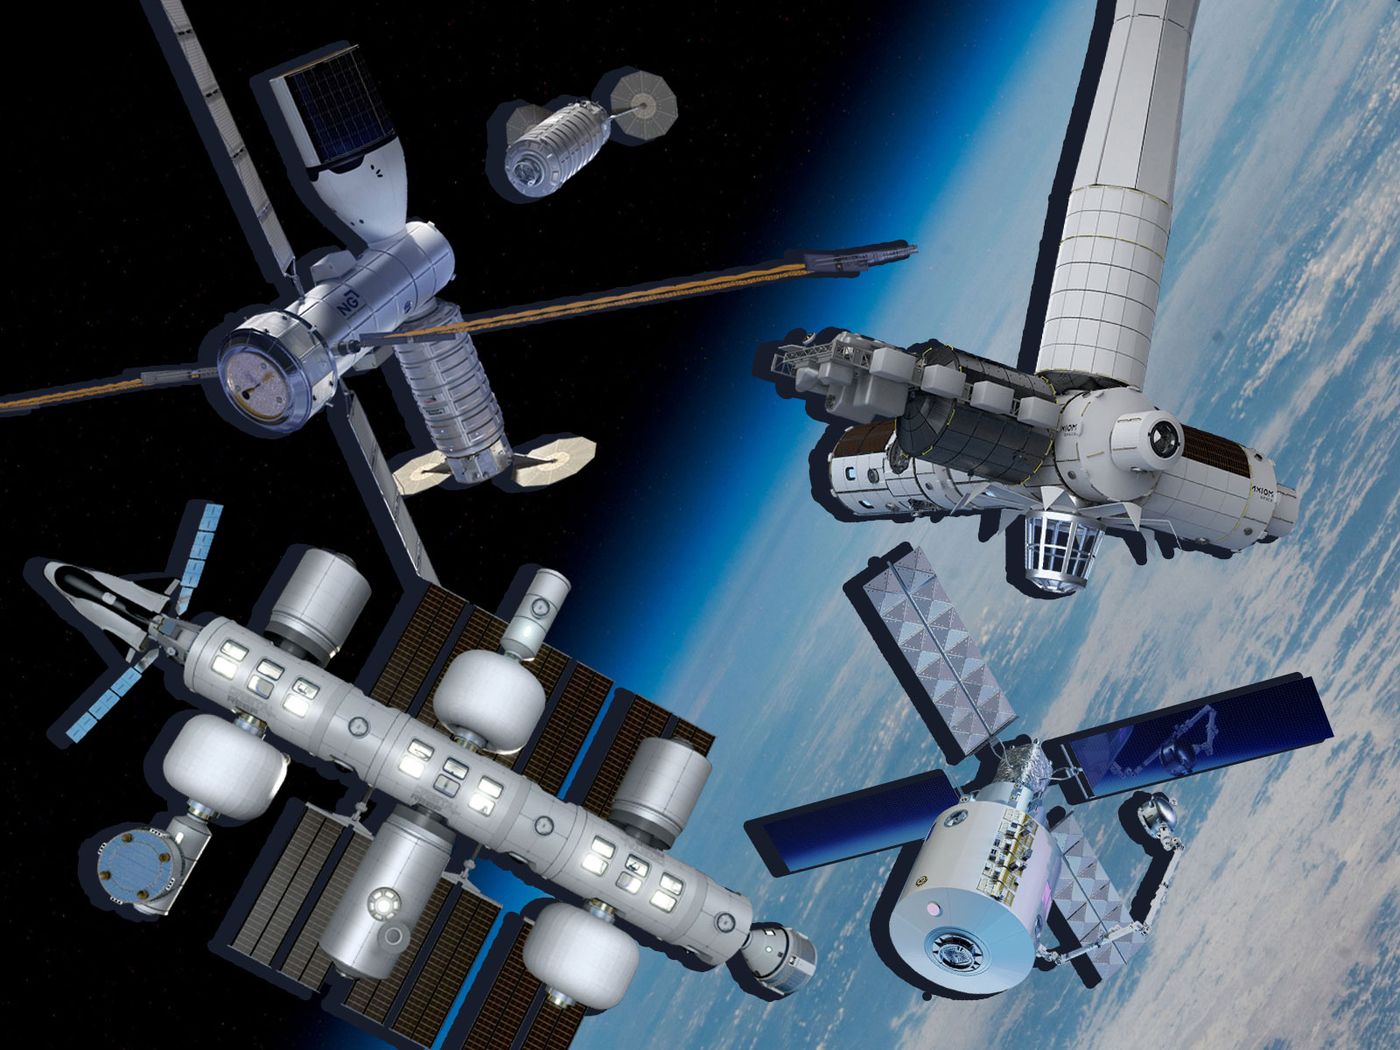 outer space vehicles